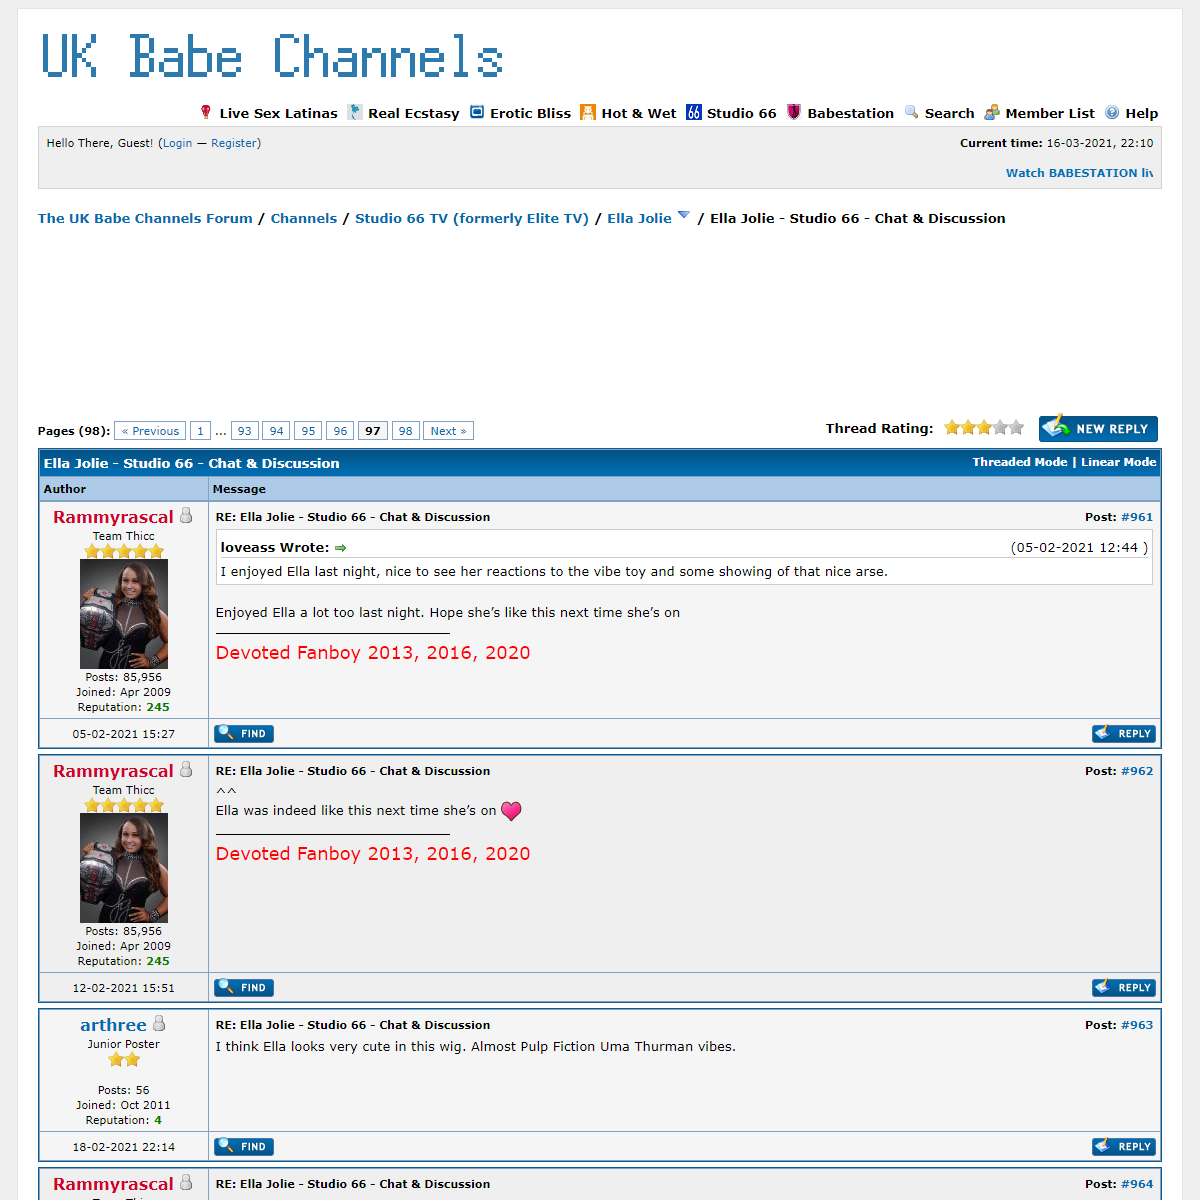 A complete backup of https://www.babeshows.co.uk/showthread.php?tid=63468&page=97